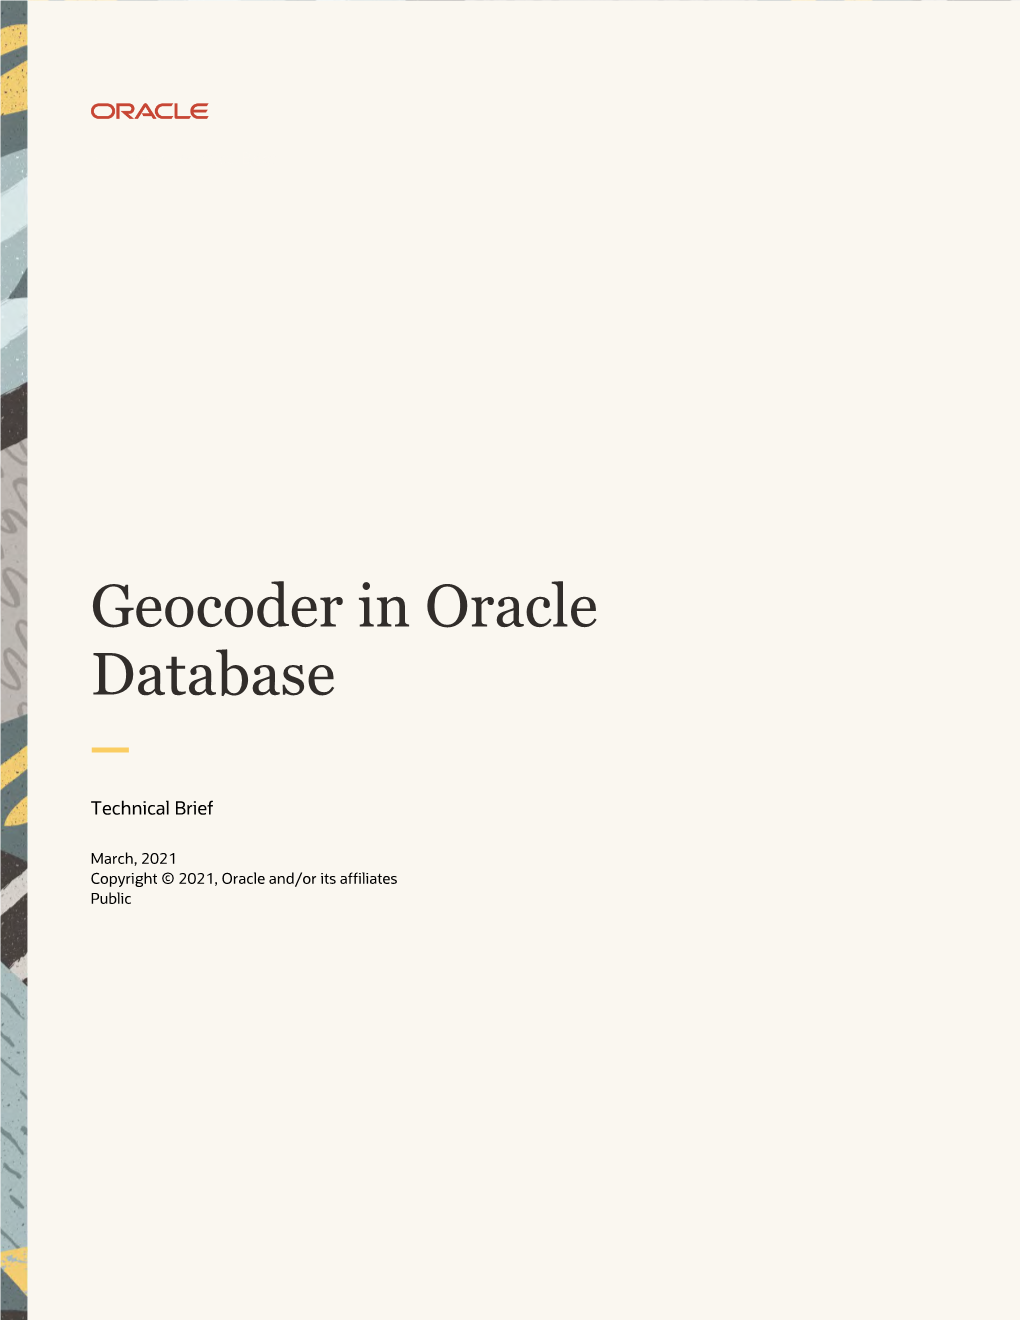 Learn More About Geocoder in Oracle Database